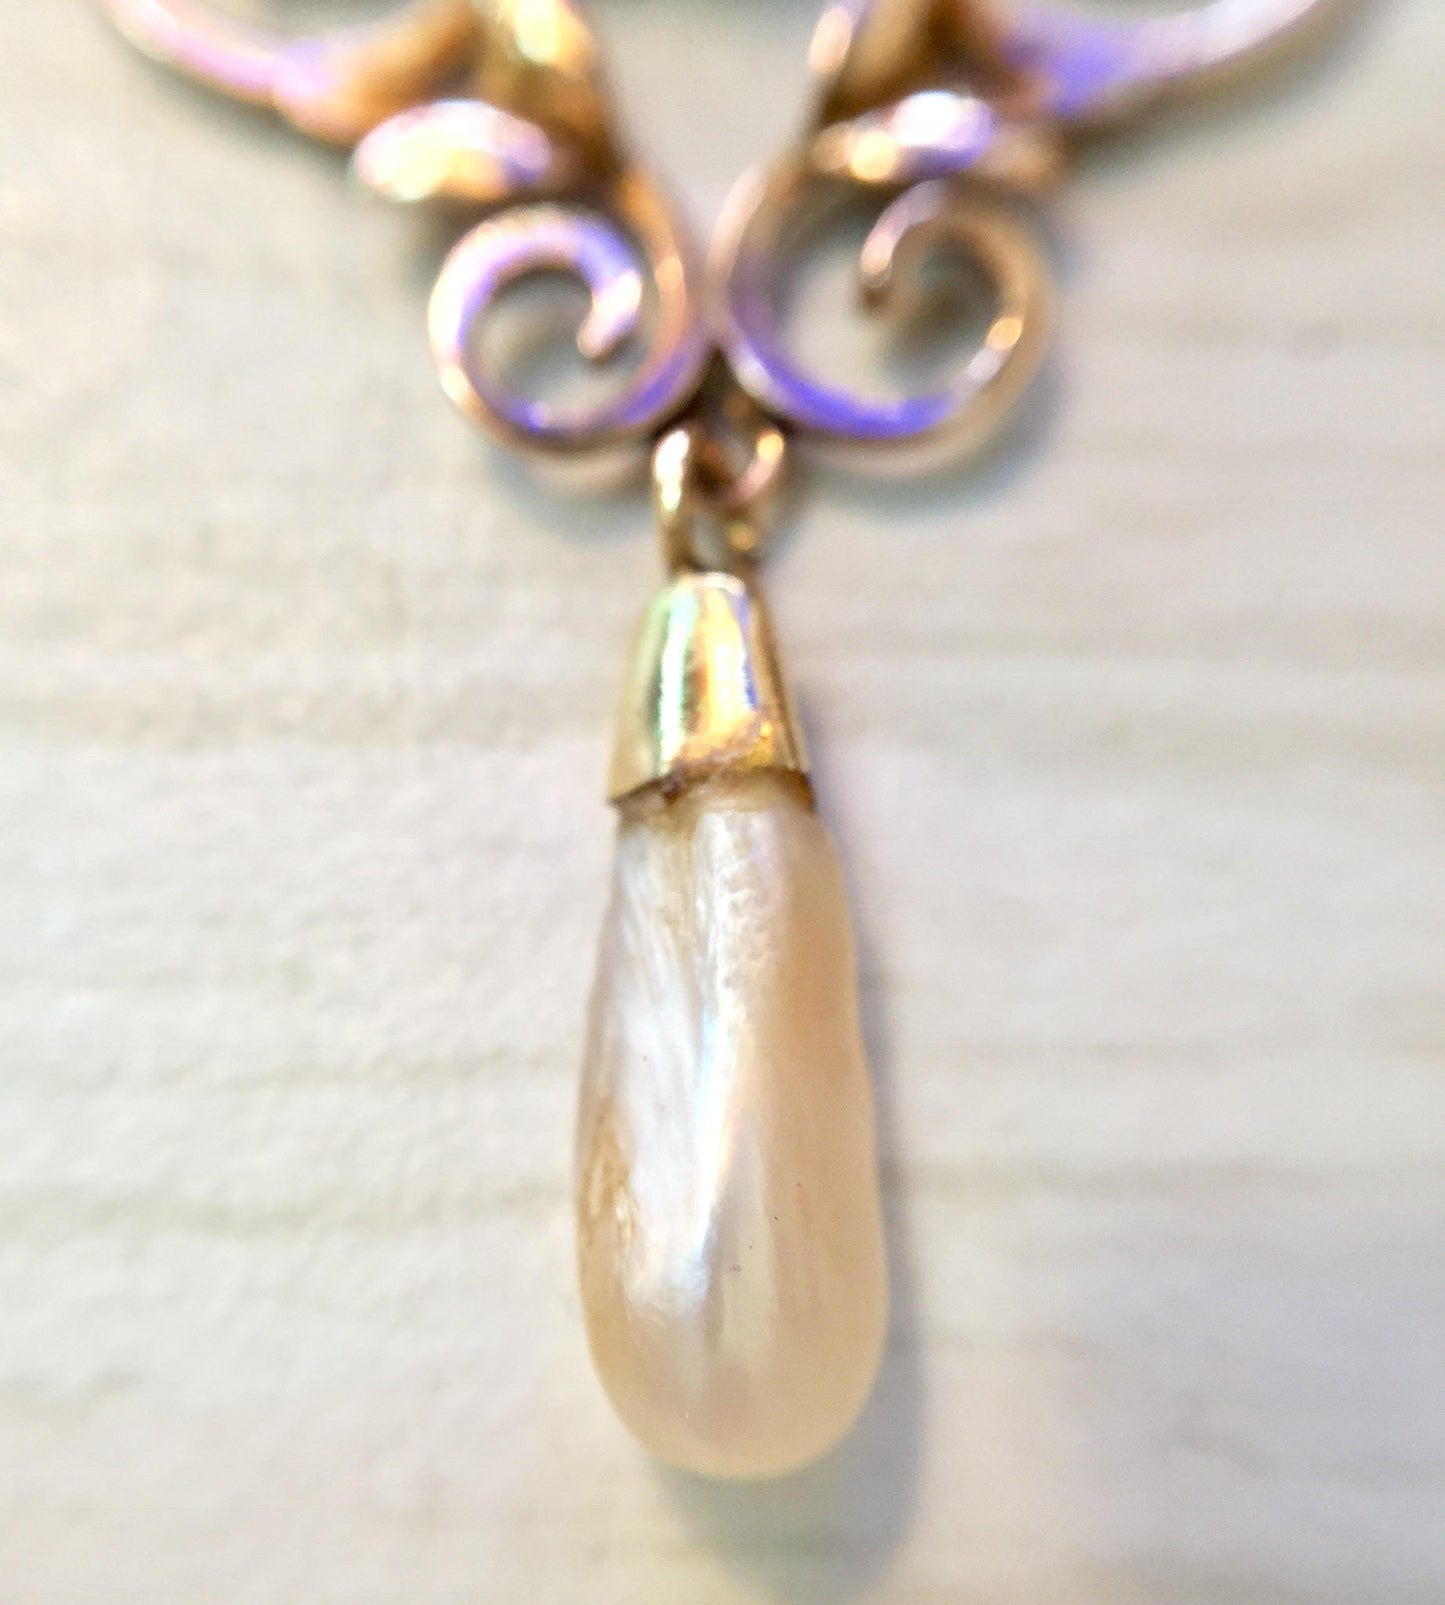 10K gold antique pendant necklace with fresh water pearl drop and swirling amethyst accents, showcasing intricate metalwork on delicate chain against soft fabric background.